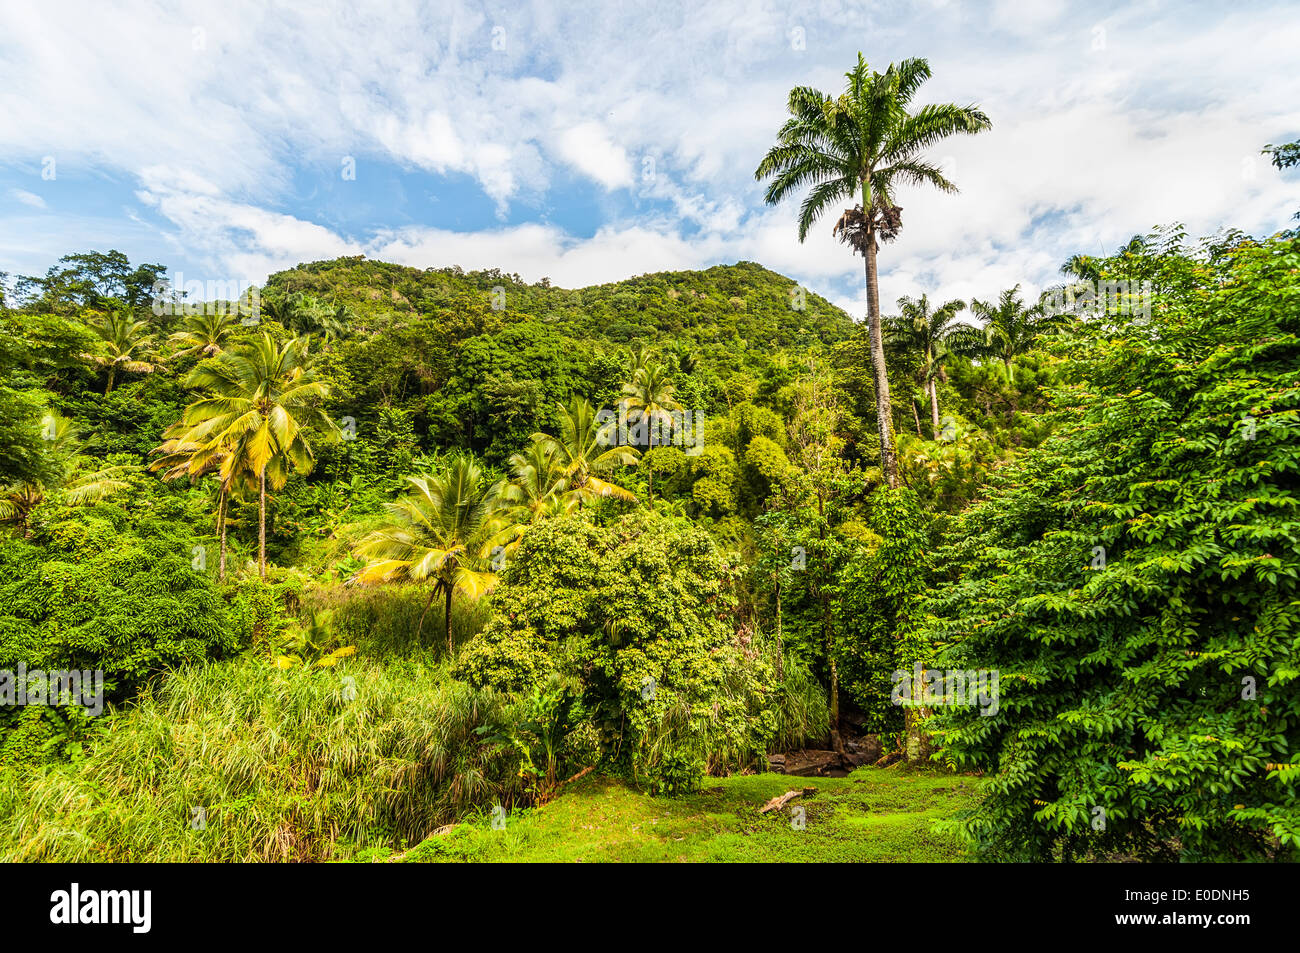 Rainforest and volcanic mountains on Caribbean island of Dominica. Stock Photo